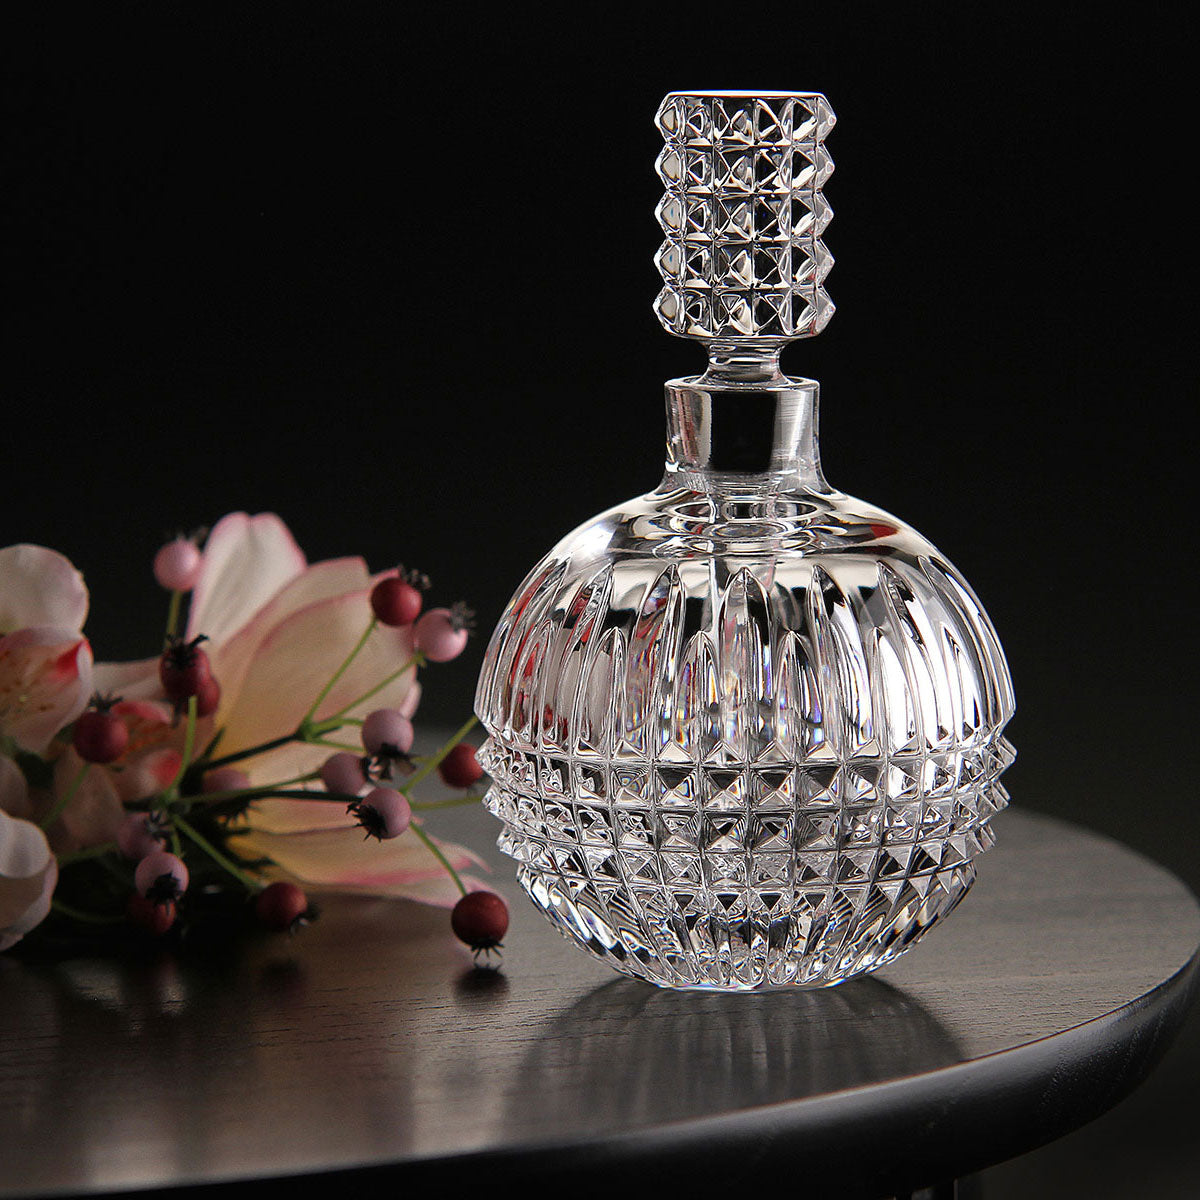 Waterford Crystal Lismore Diamond Perfume Bottle Tall  By Waterford Crystal, Unique, feminine gifts for the nightstand or dressing table. These beautiful crystal bedside essentials feature the distinctive Lismore Diamond cutting pattern perfect for birthdays, showers or thoughtful remembrance.